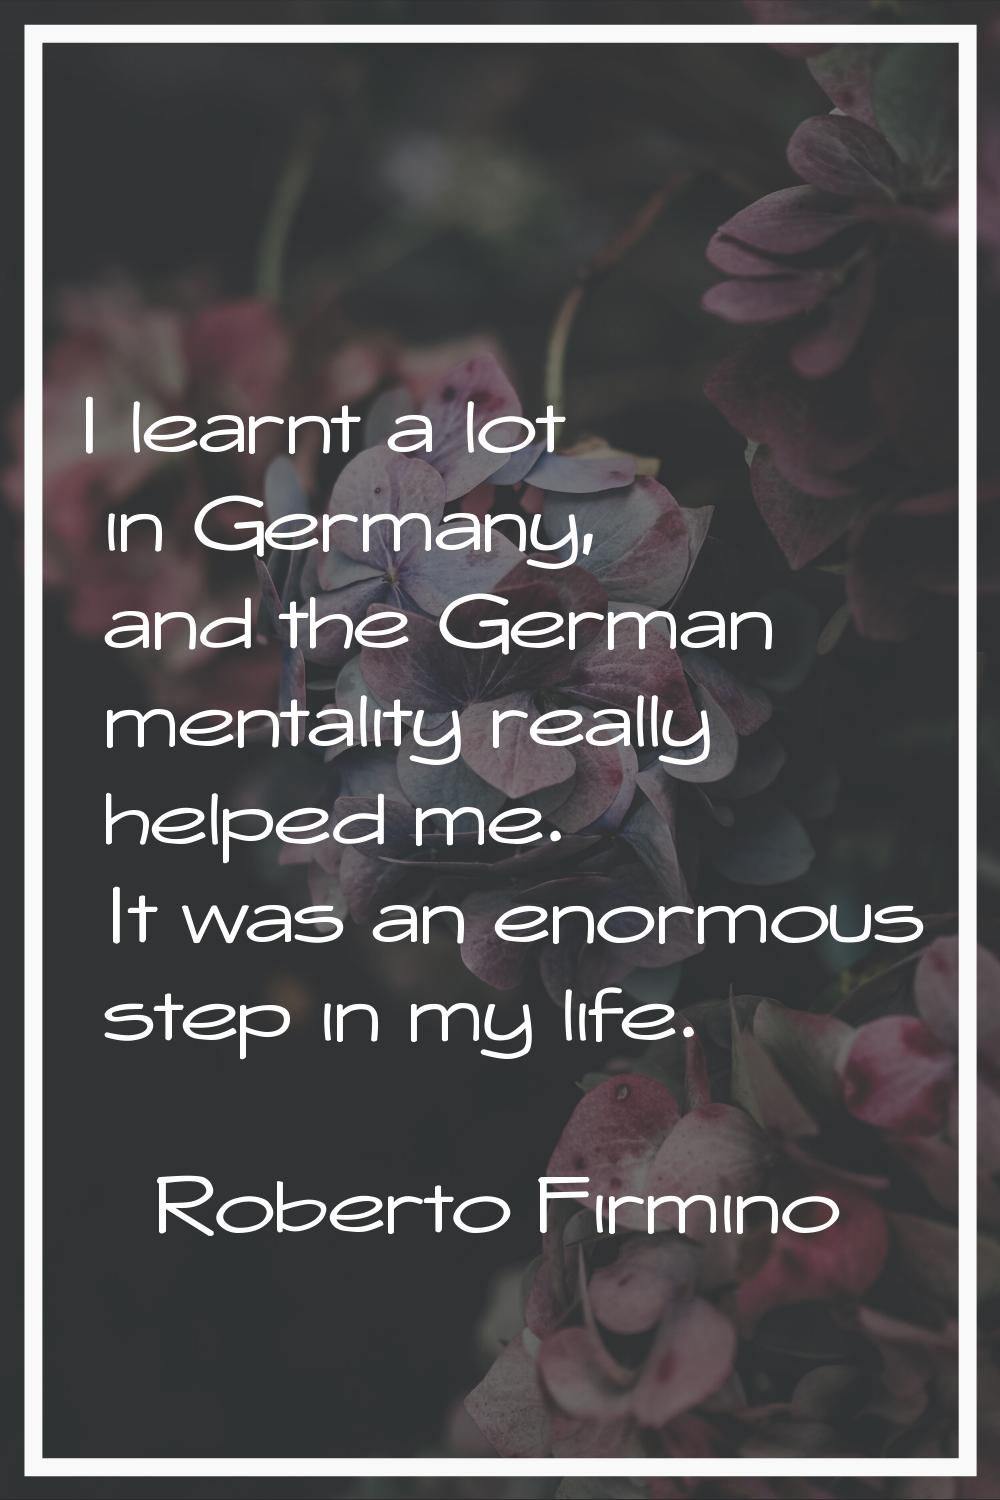 I learnt a lot in Germany, and the German mentality really helped me. It was an enormous step in my